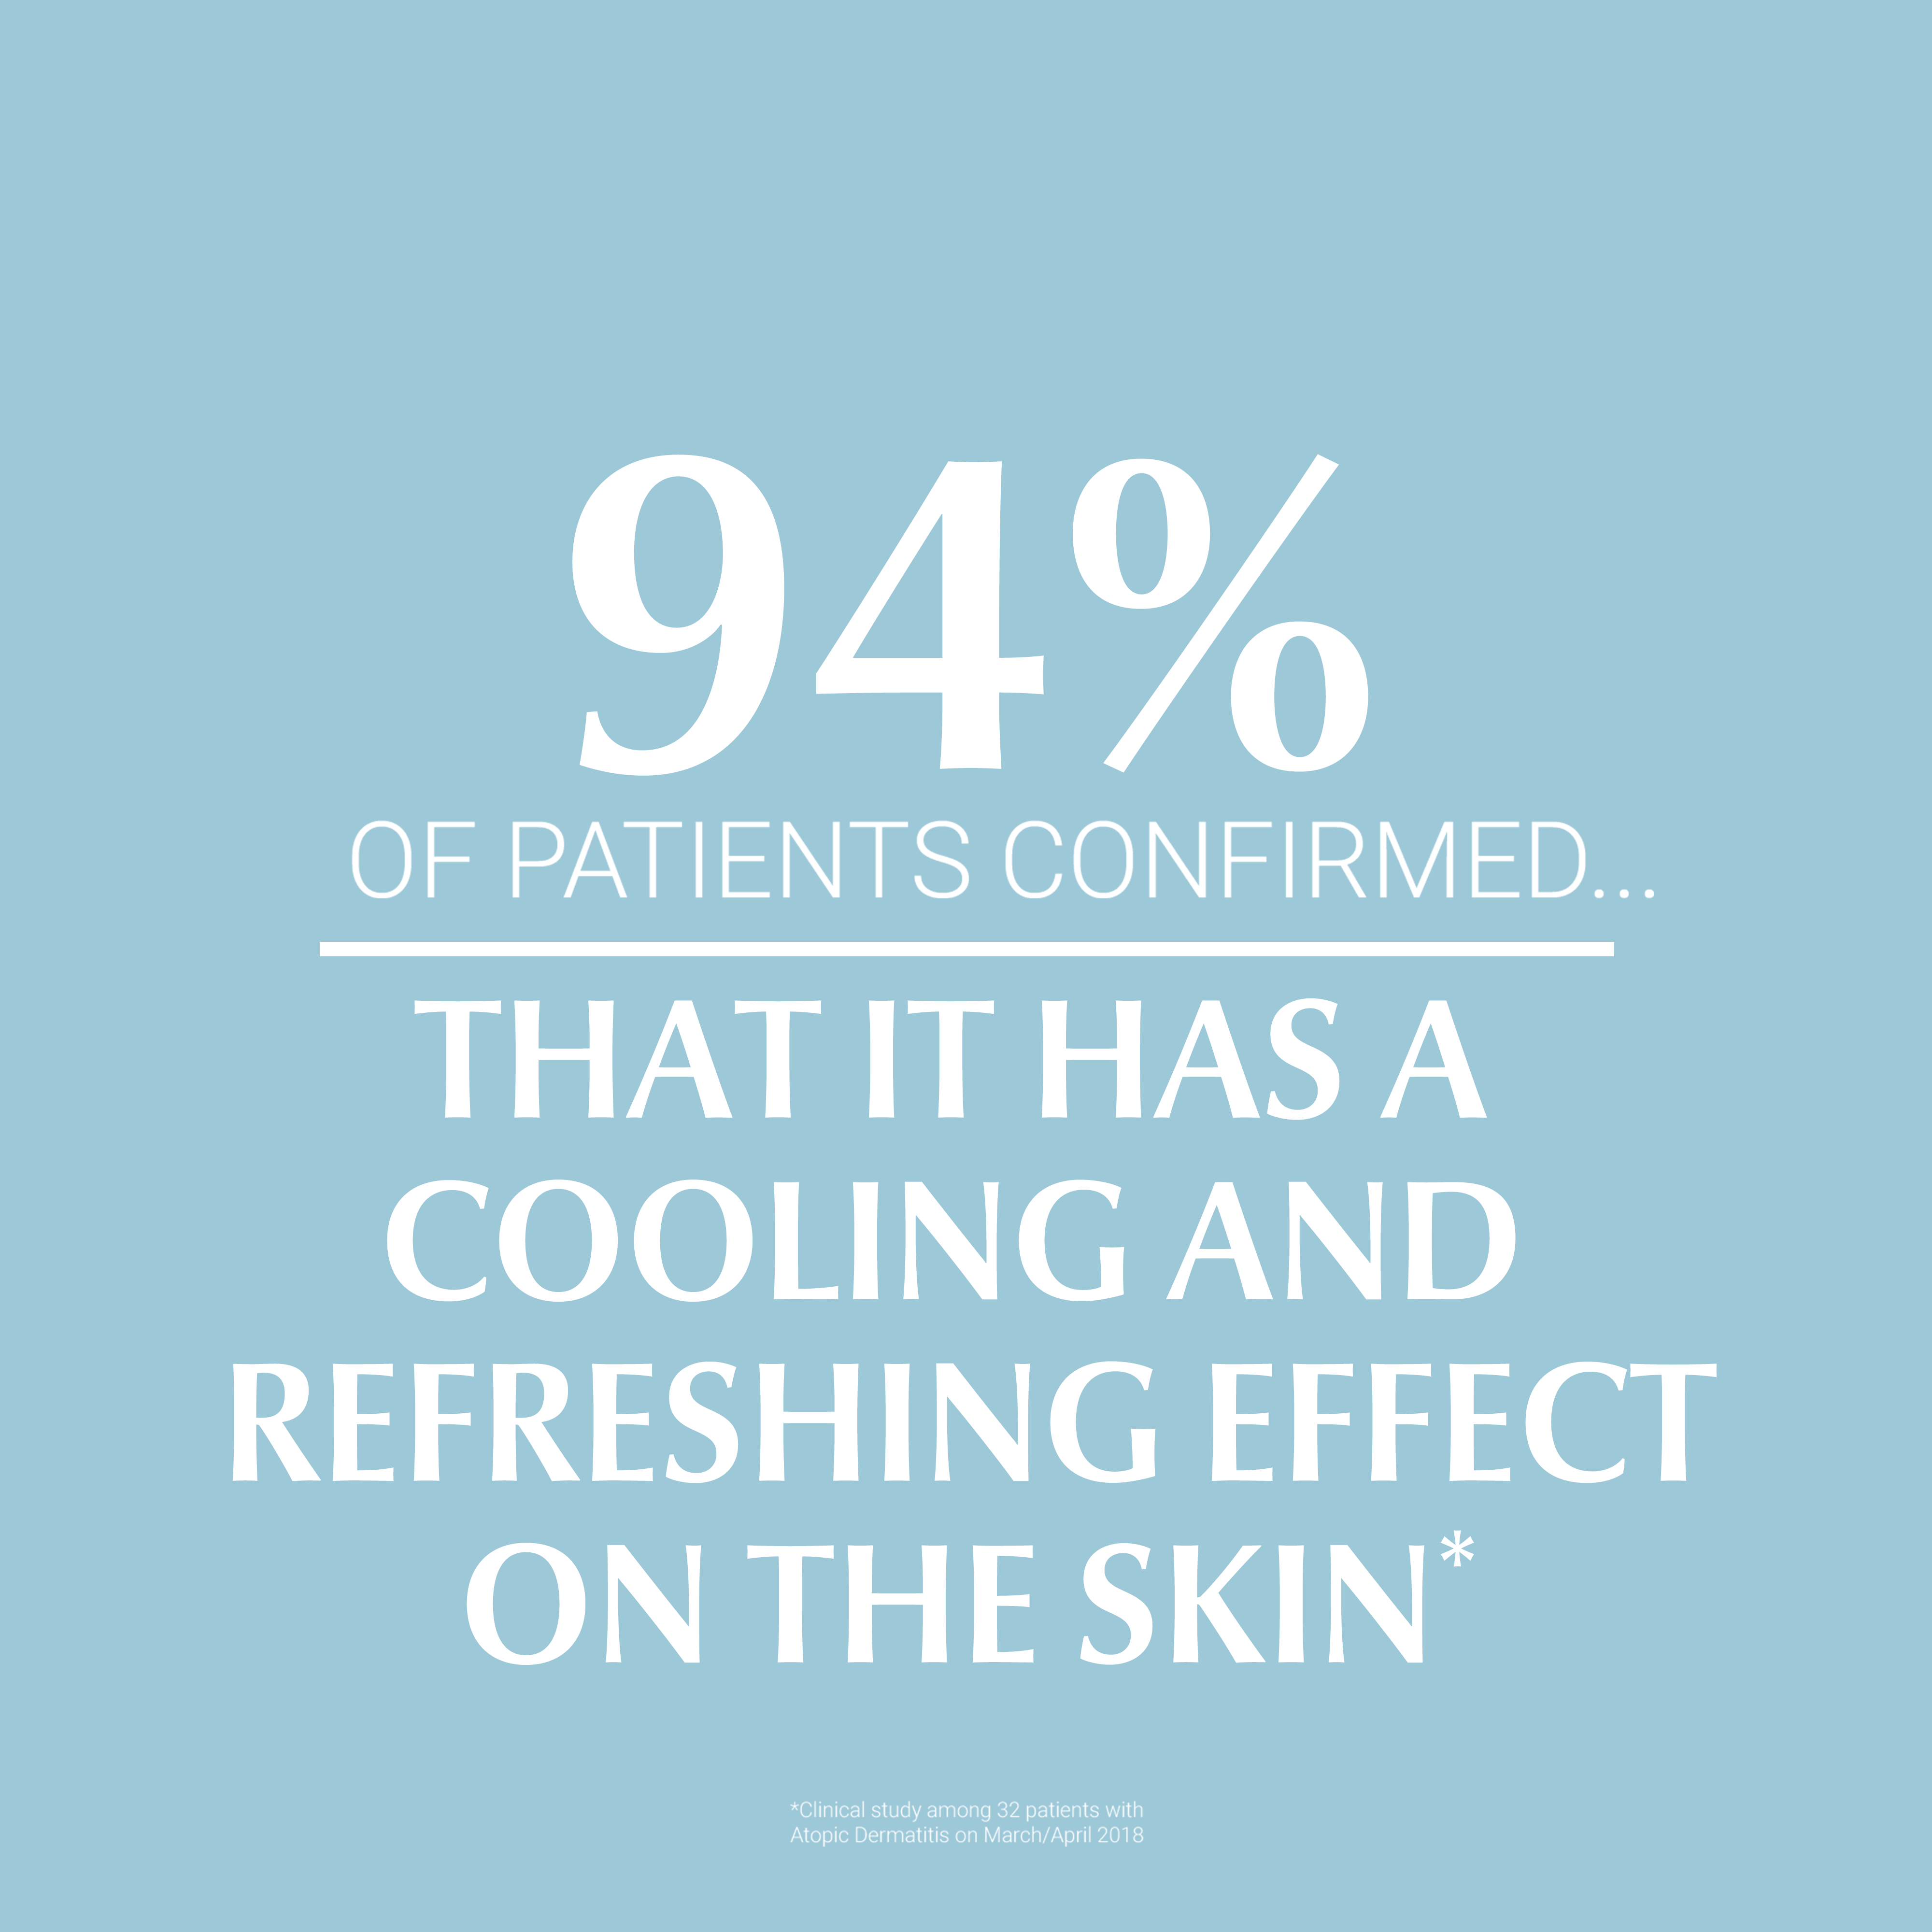 A Clinical study among 32 patients using Eucerin Acute Calm Spray with Atopic Dermatitis shows that 94% OF PATIENTS CONFIRMED THAT IT HAS A COOLING AND REFRESHING EFFECT ON THE SKIN